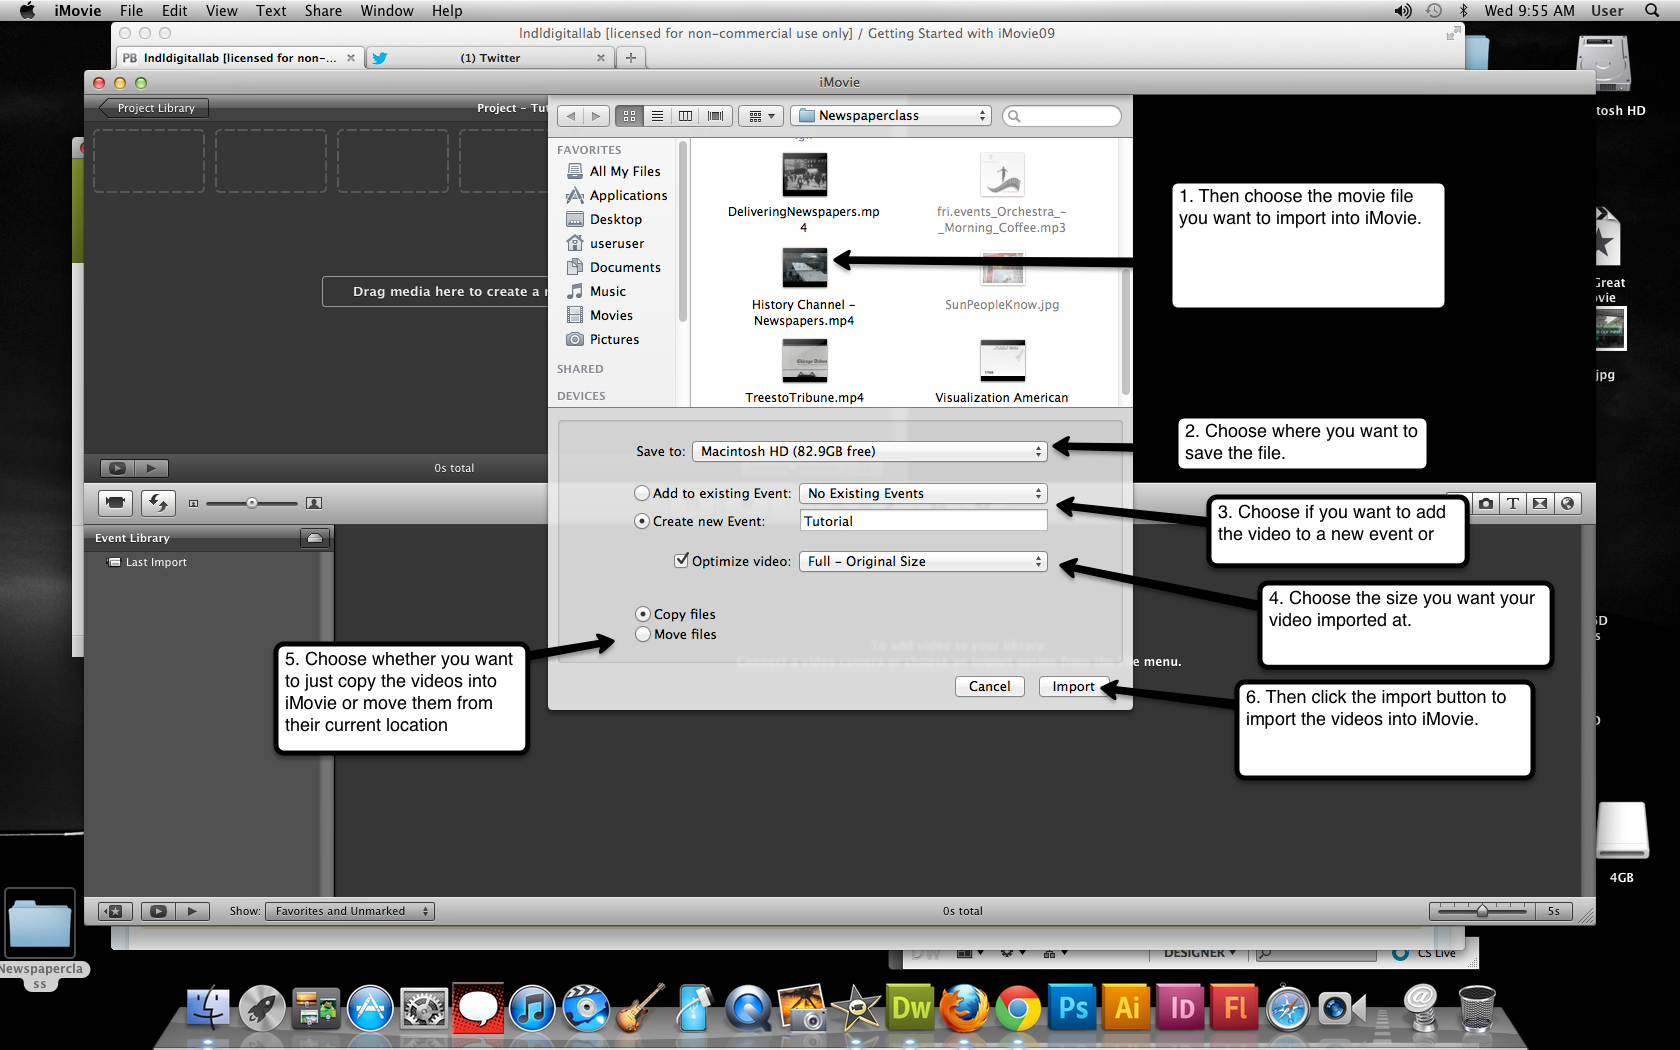 Visual guide on how to import video into iMovie '11